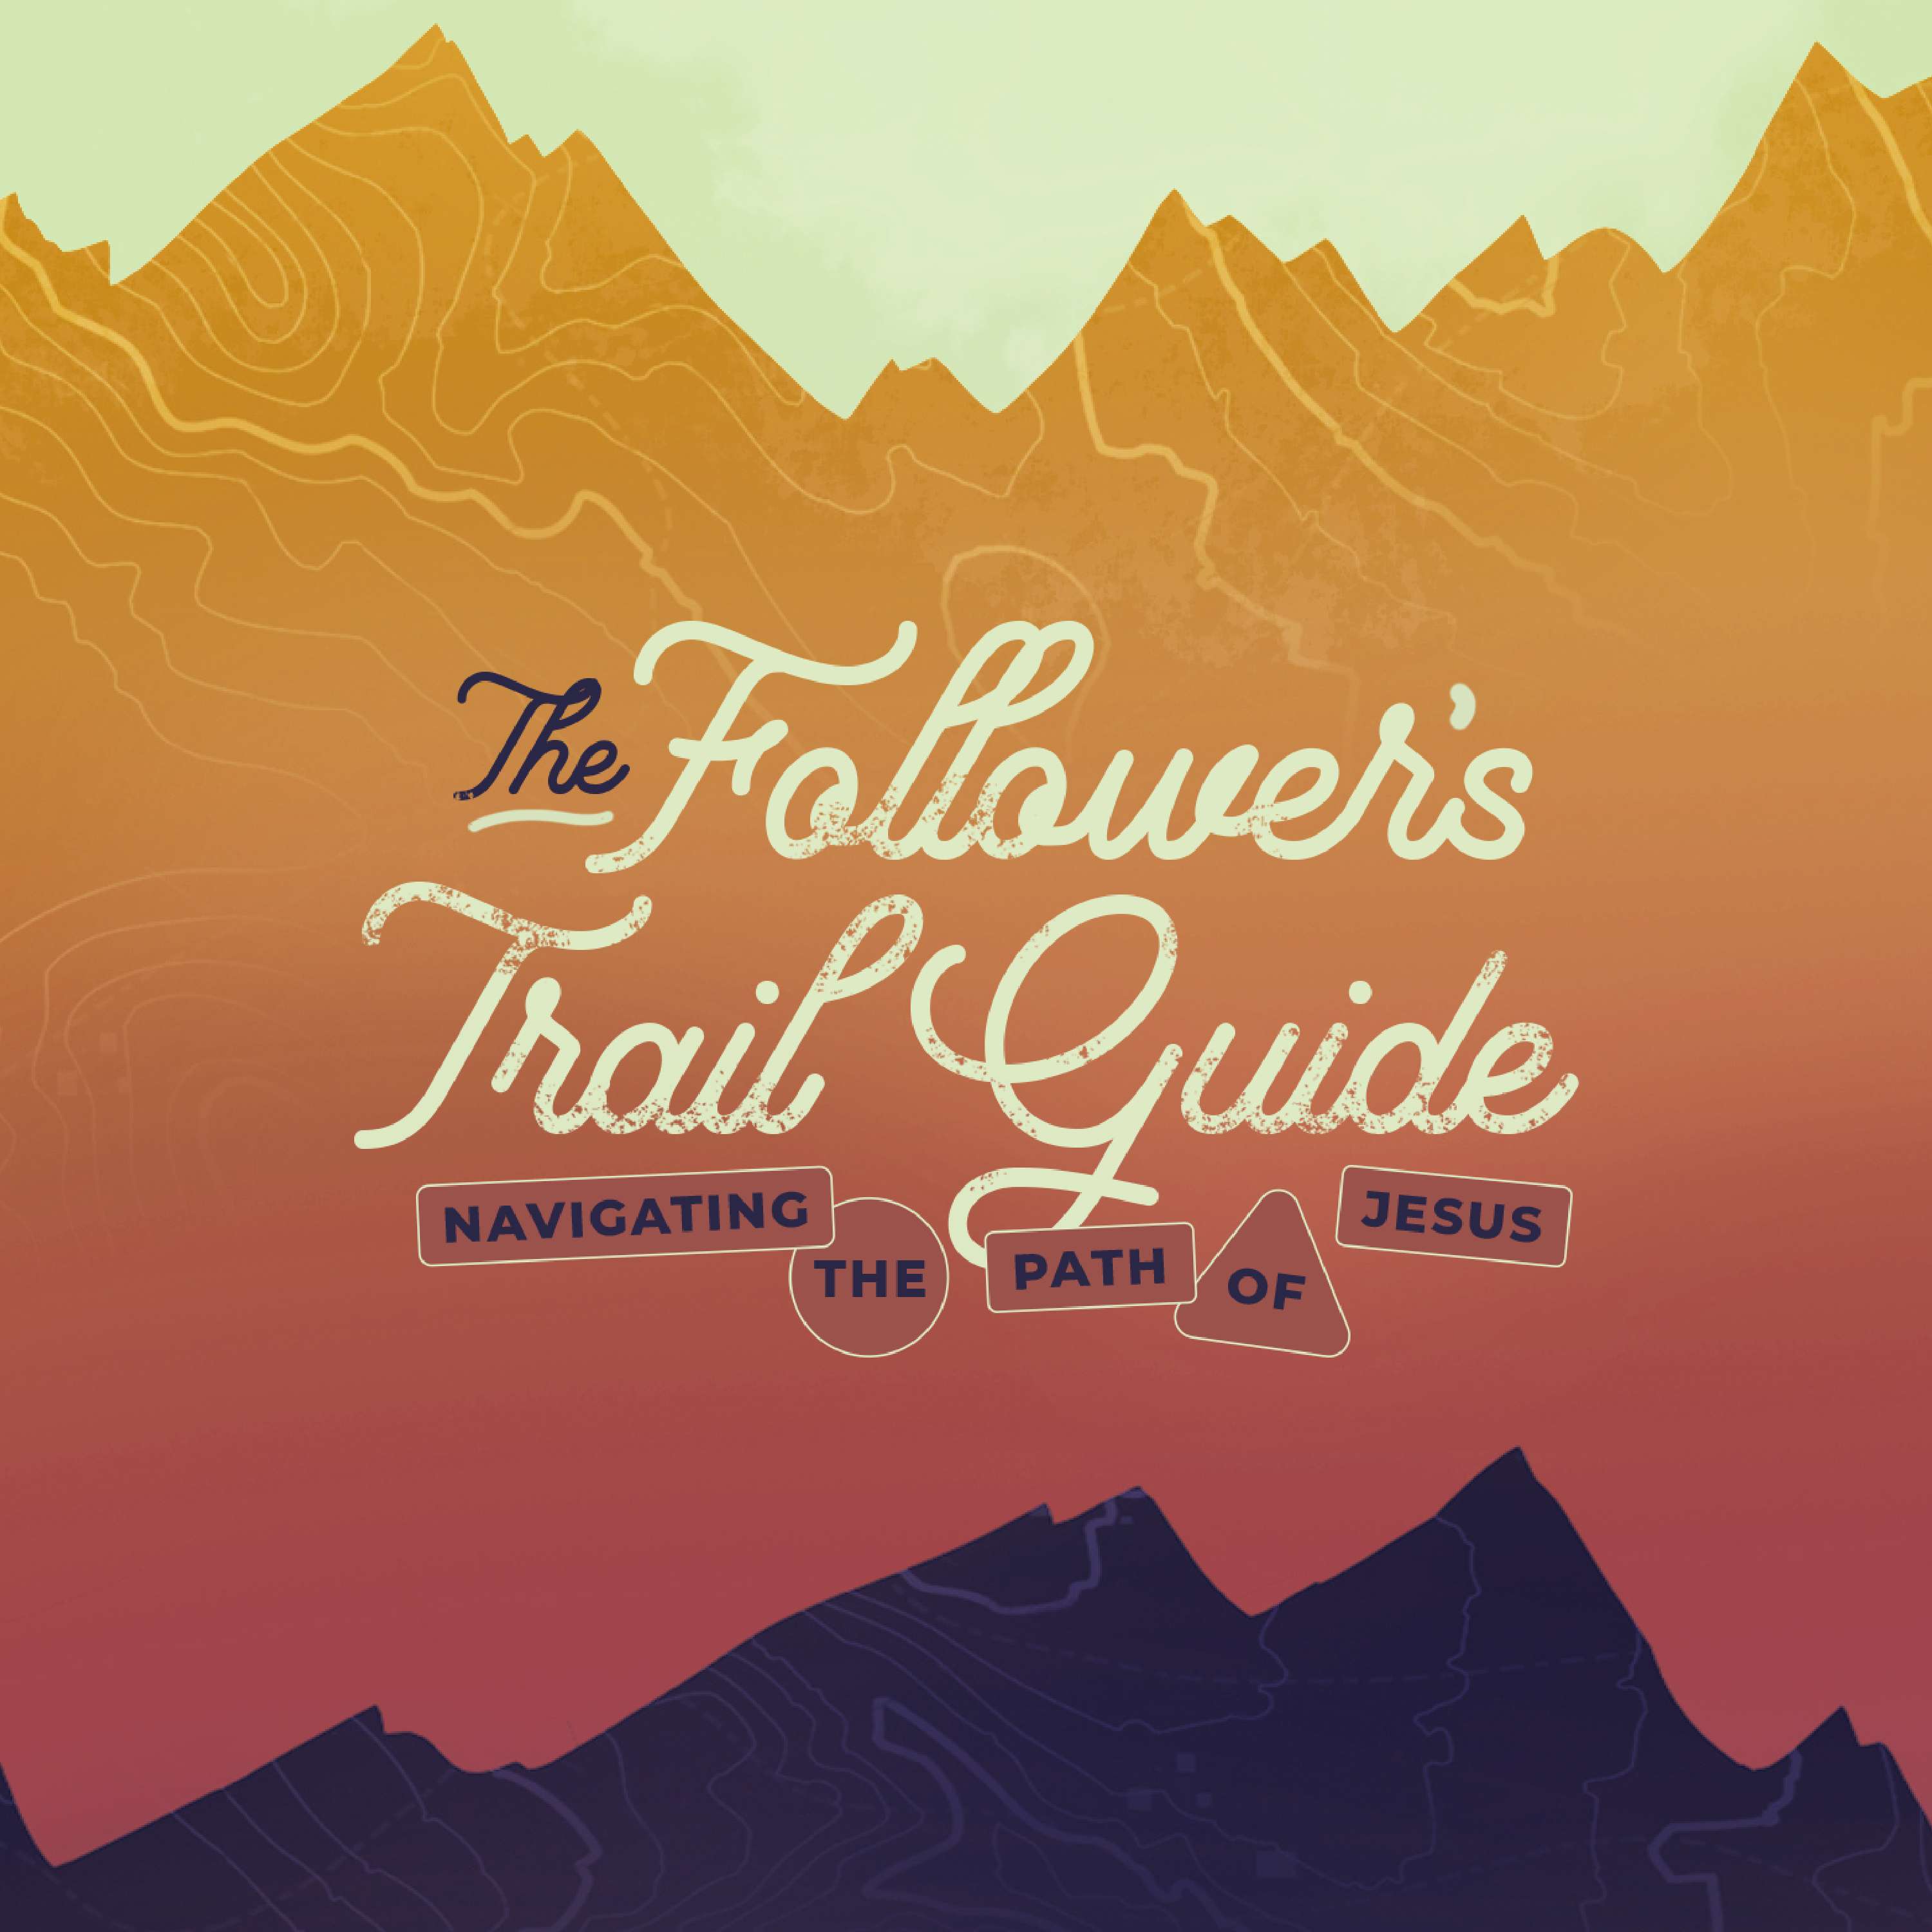 The Follower's Trail Guide - Pt 8: The Way of the Spirit - John 16:4b - 15